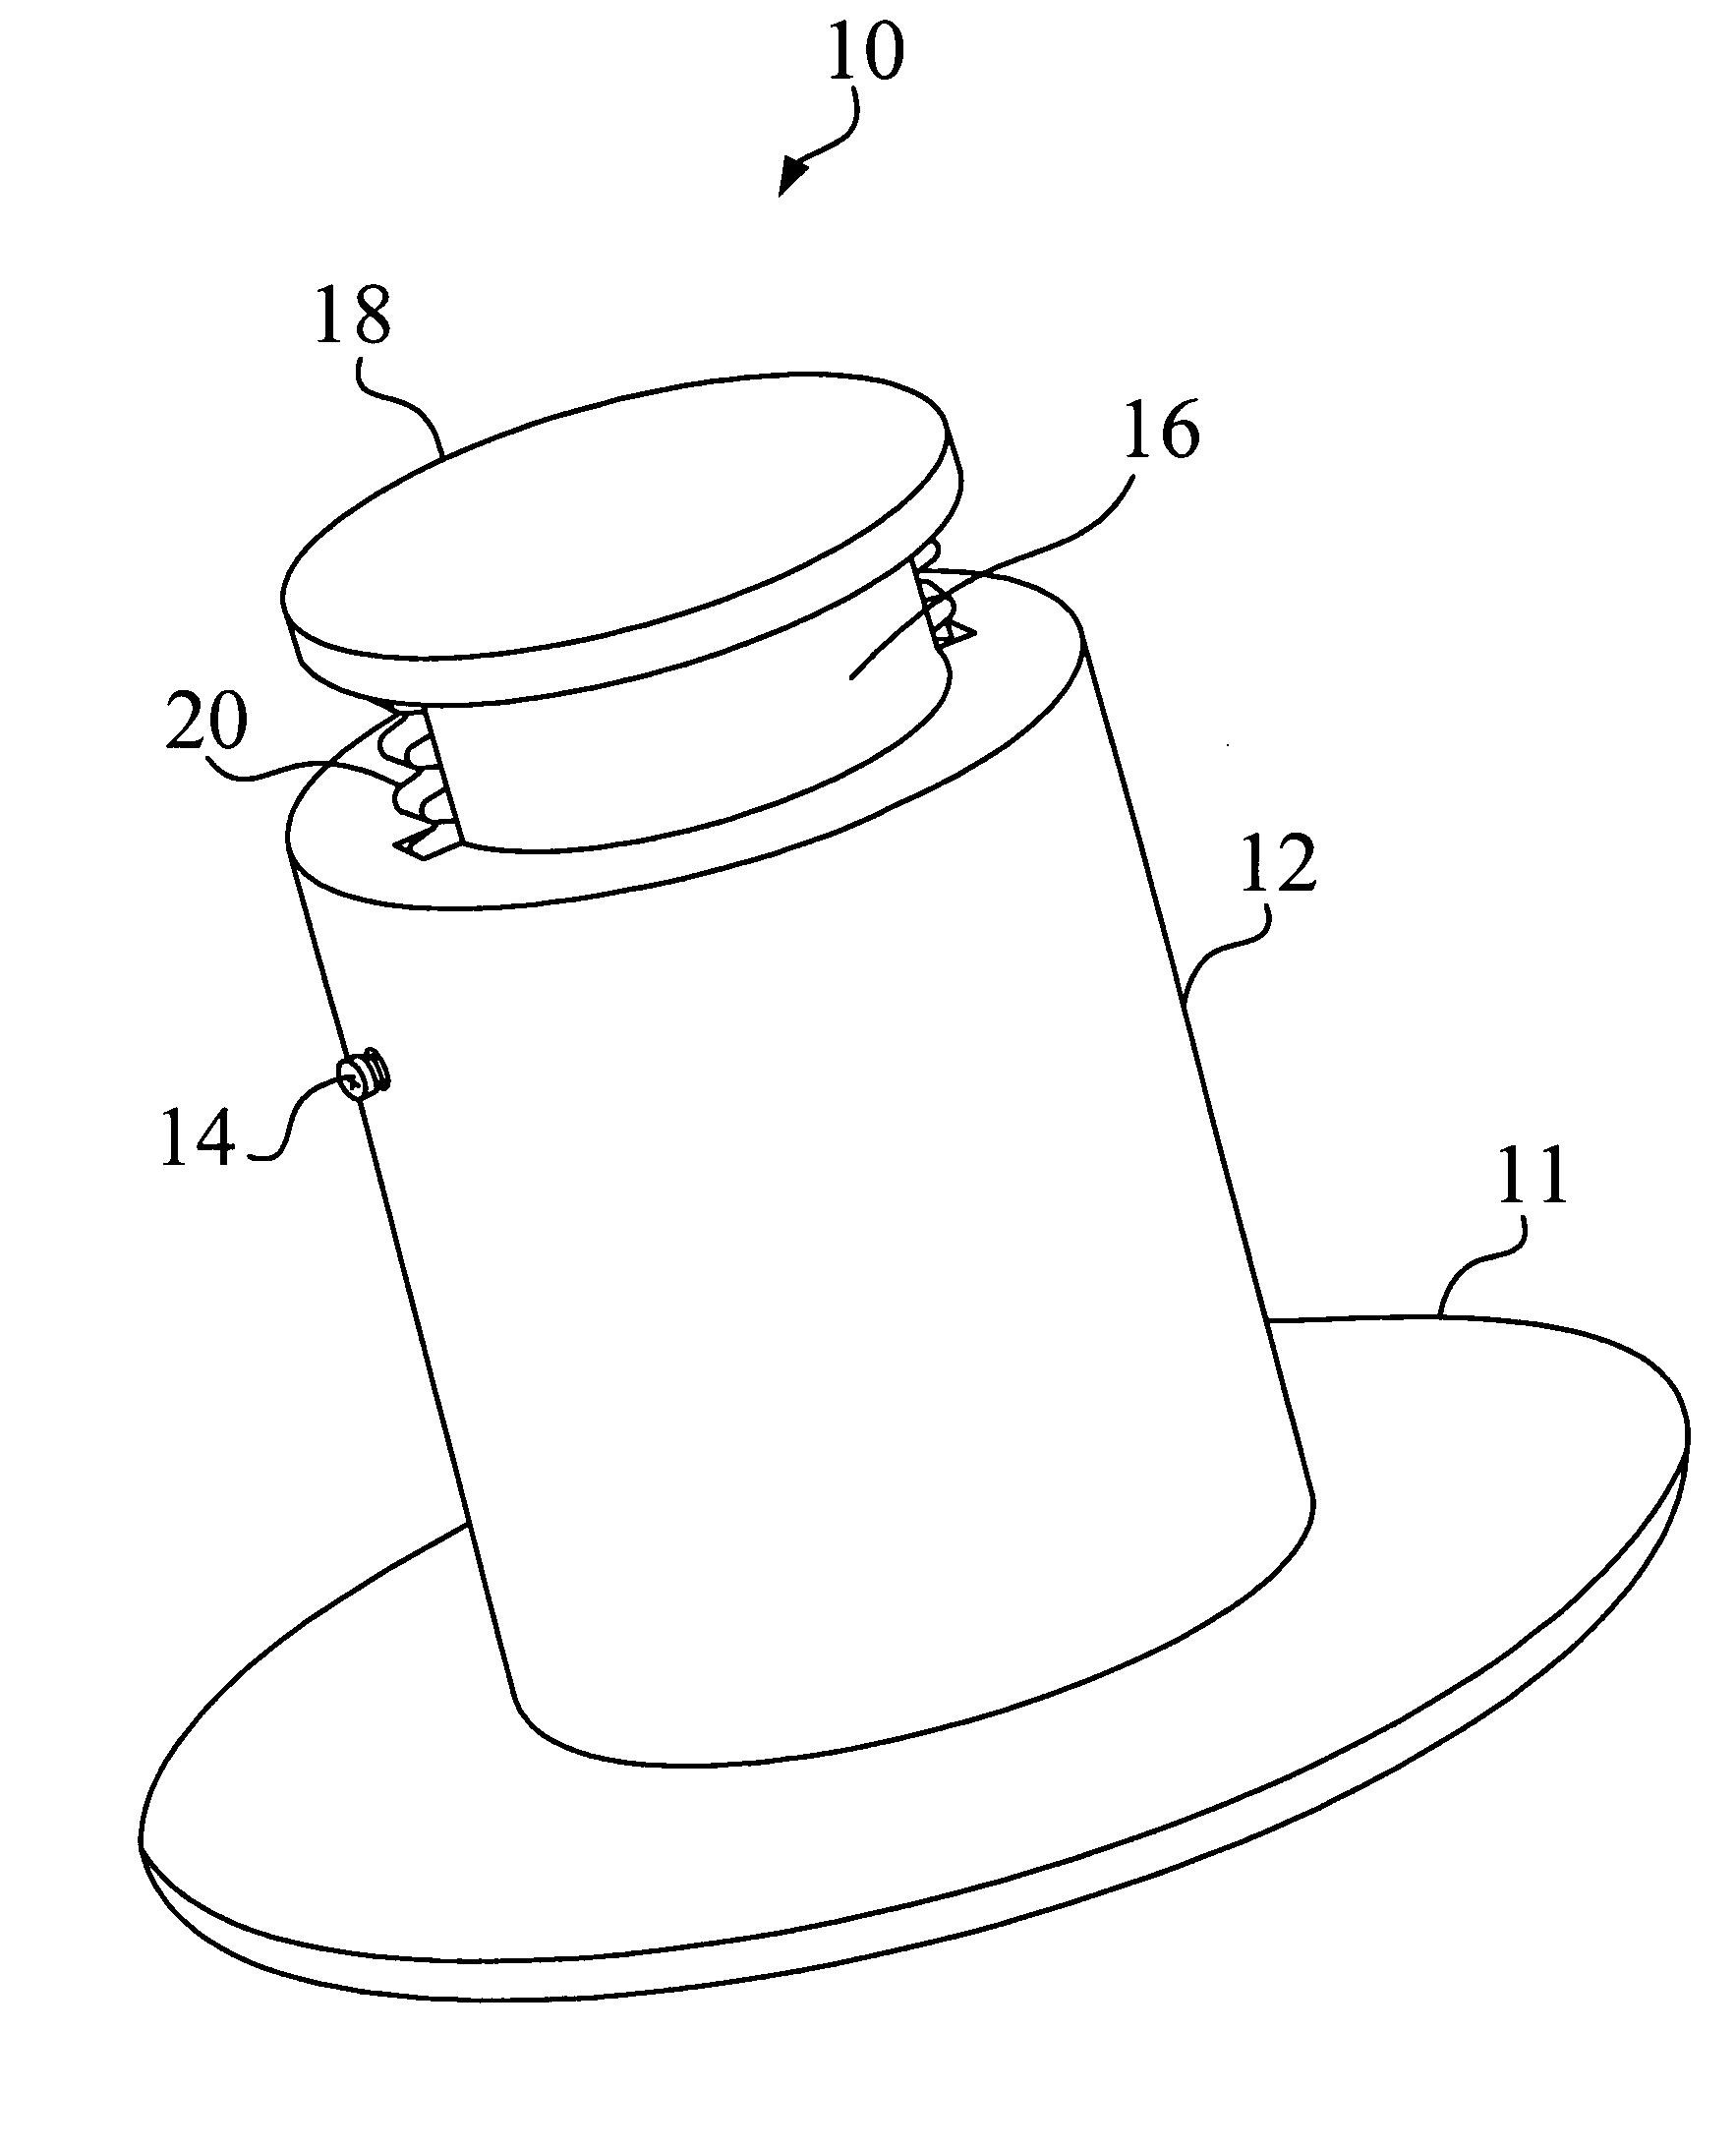 Adjustable lift support apparatus